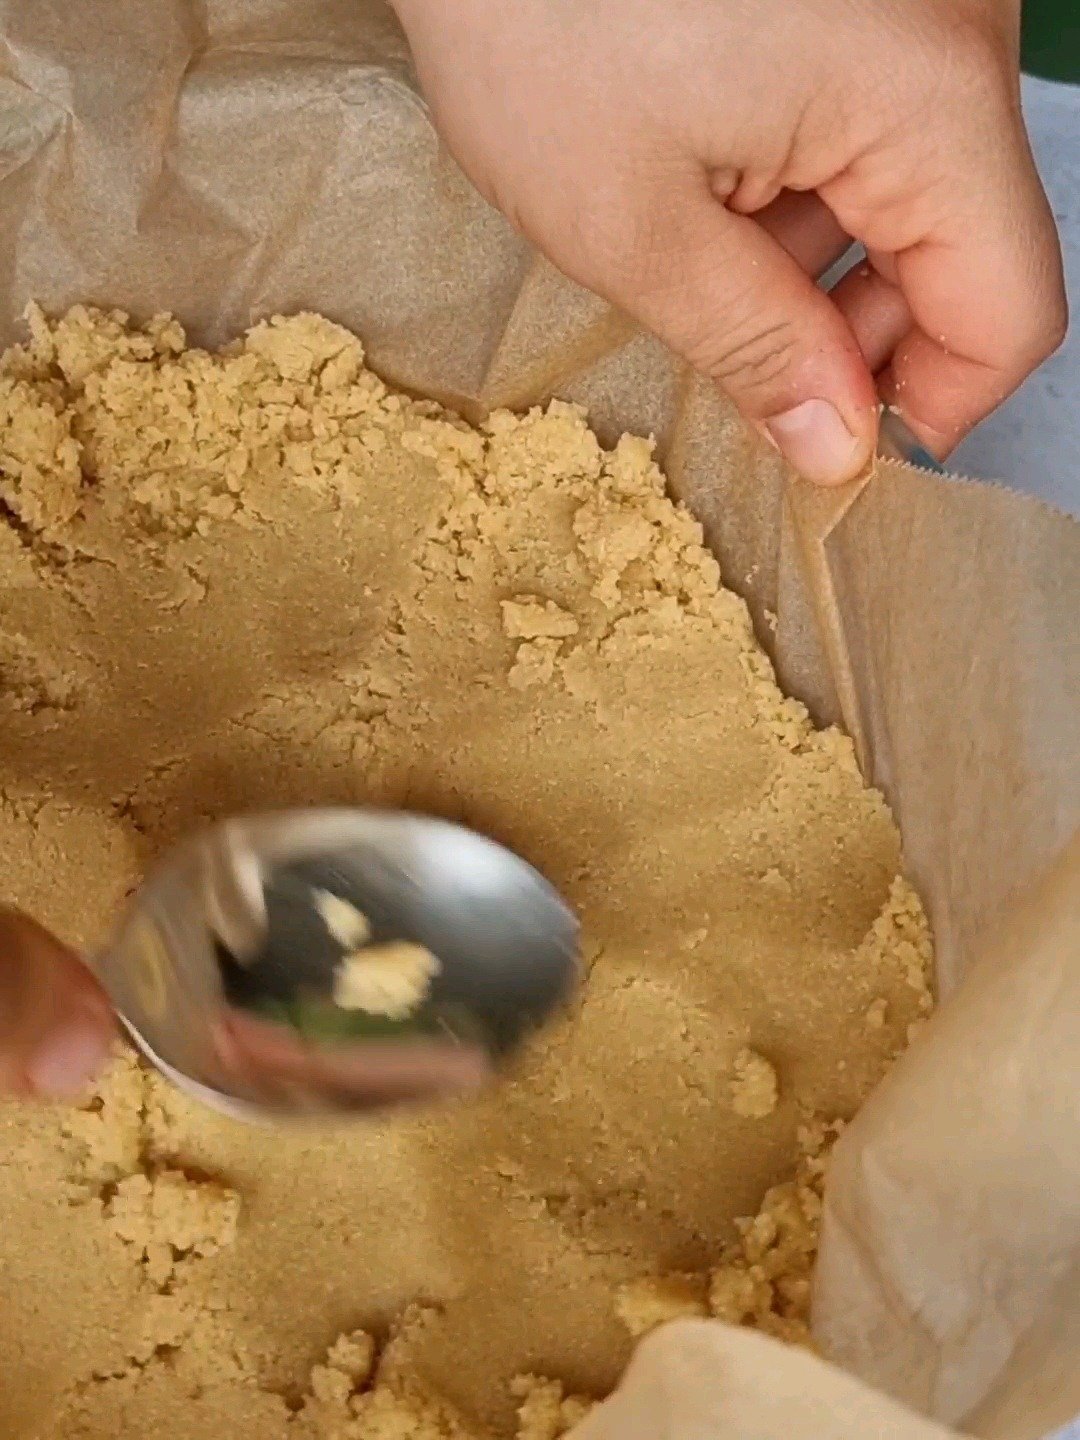 Pressing the almond flour mix in a baking tray